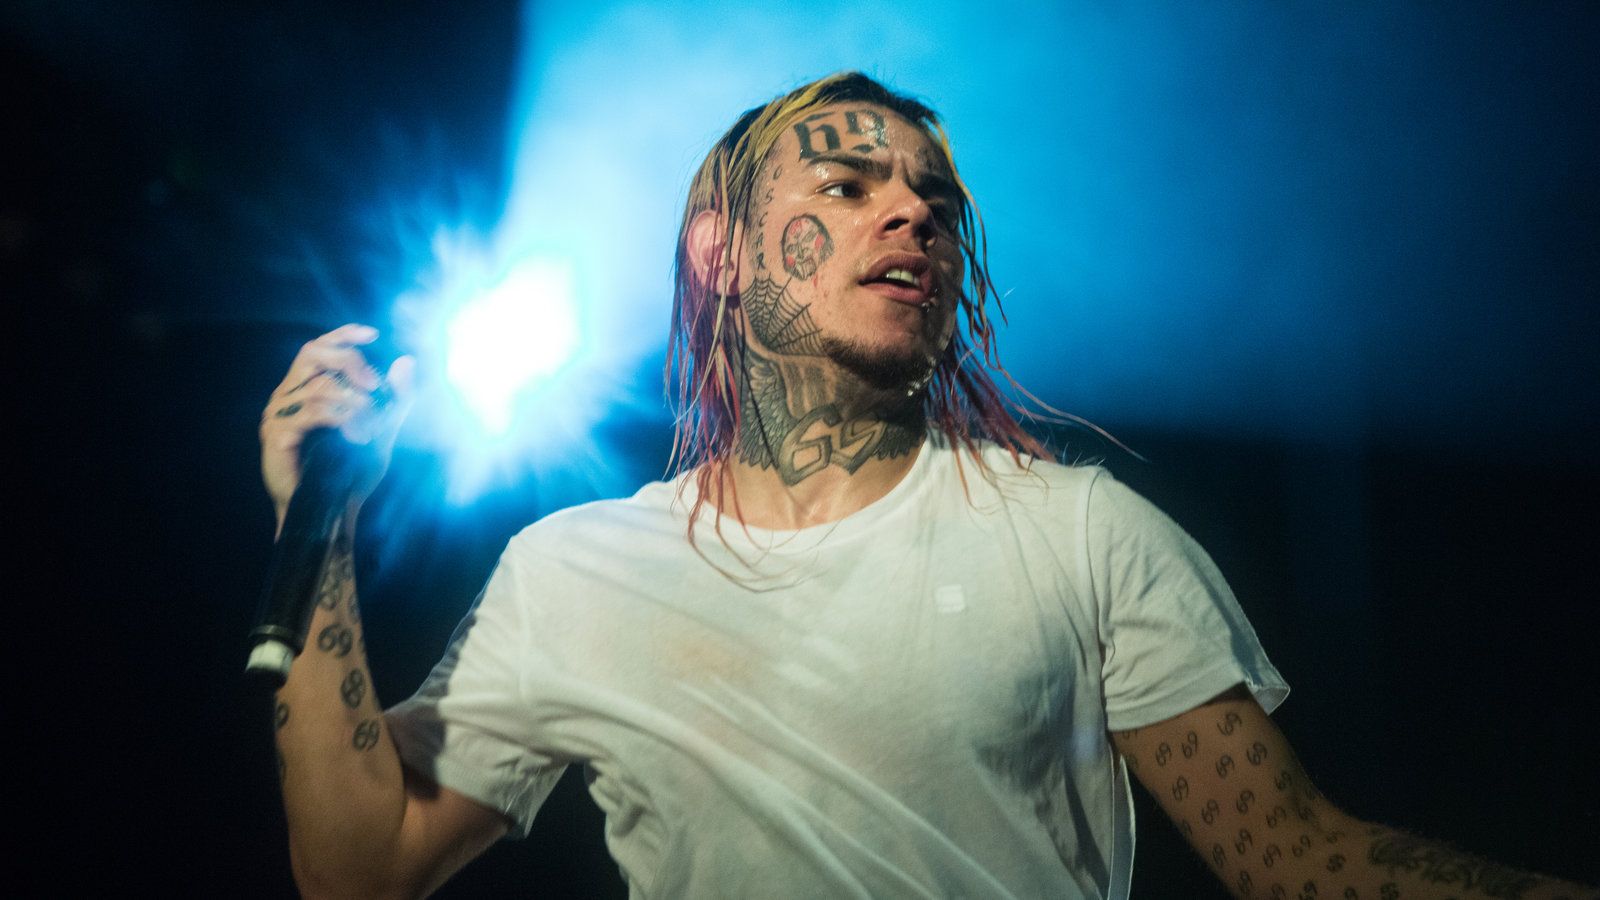 Dropping the Facade, Tekashi 69 Is Just Daniel Hernandez in Court